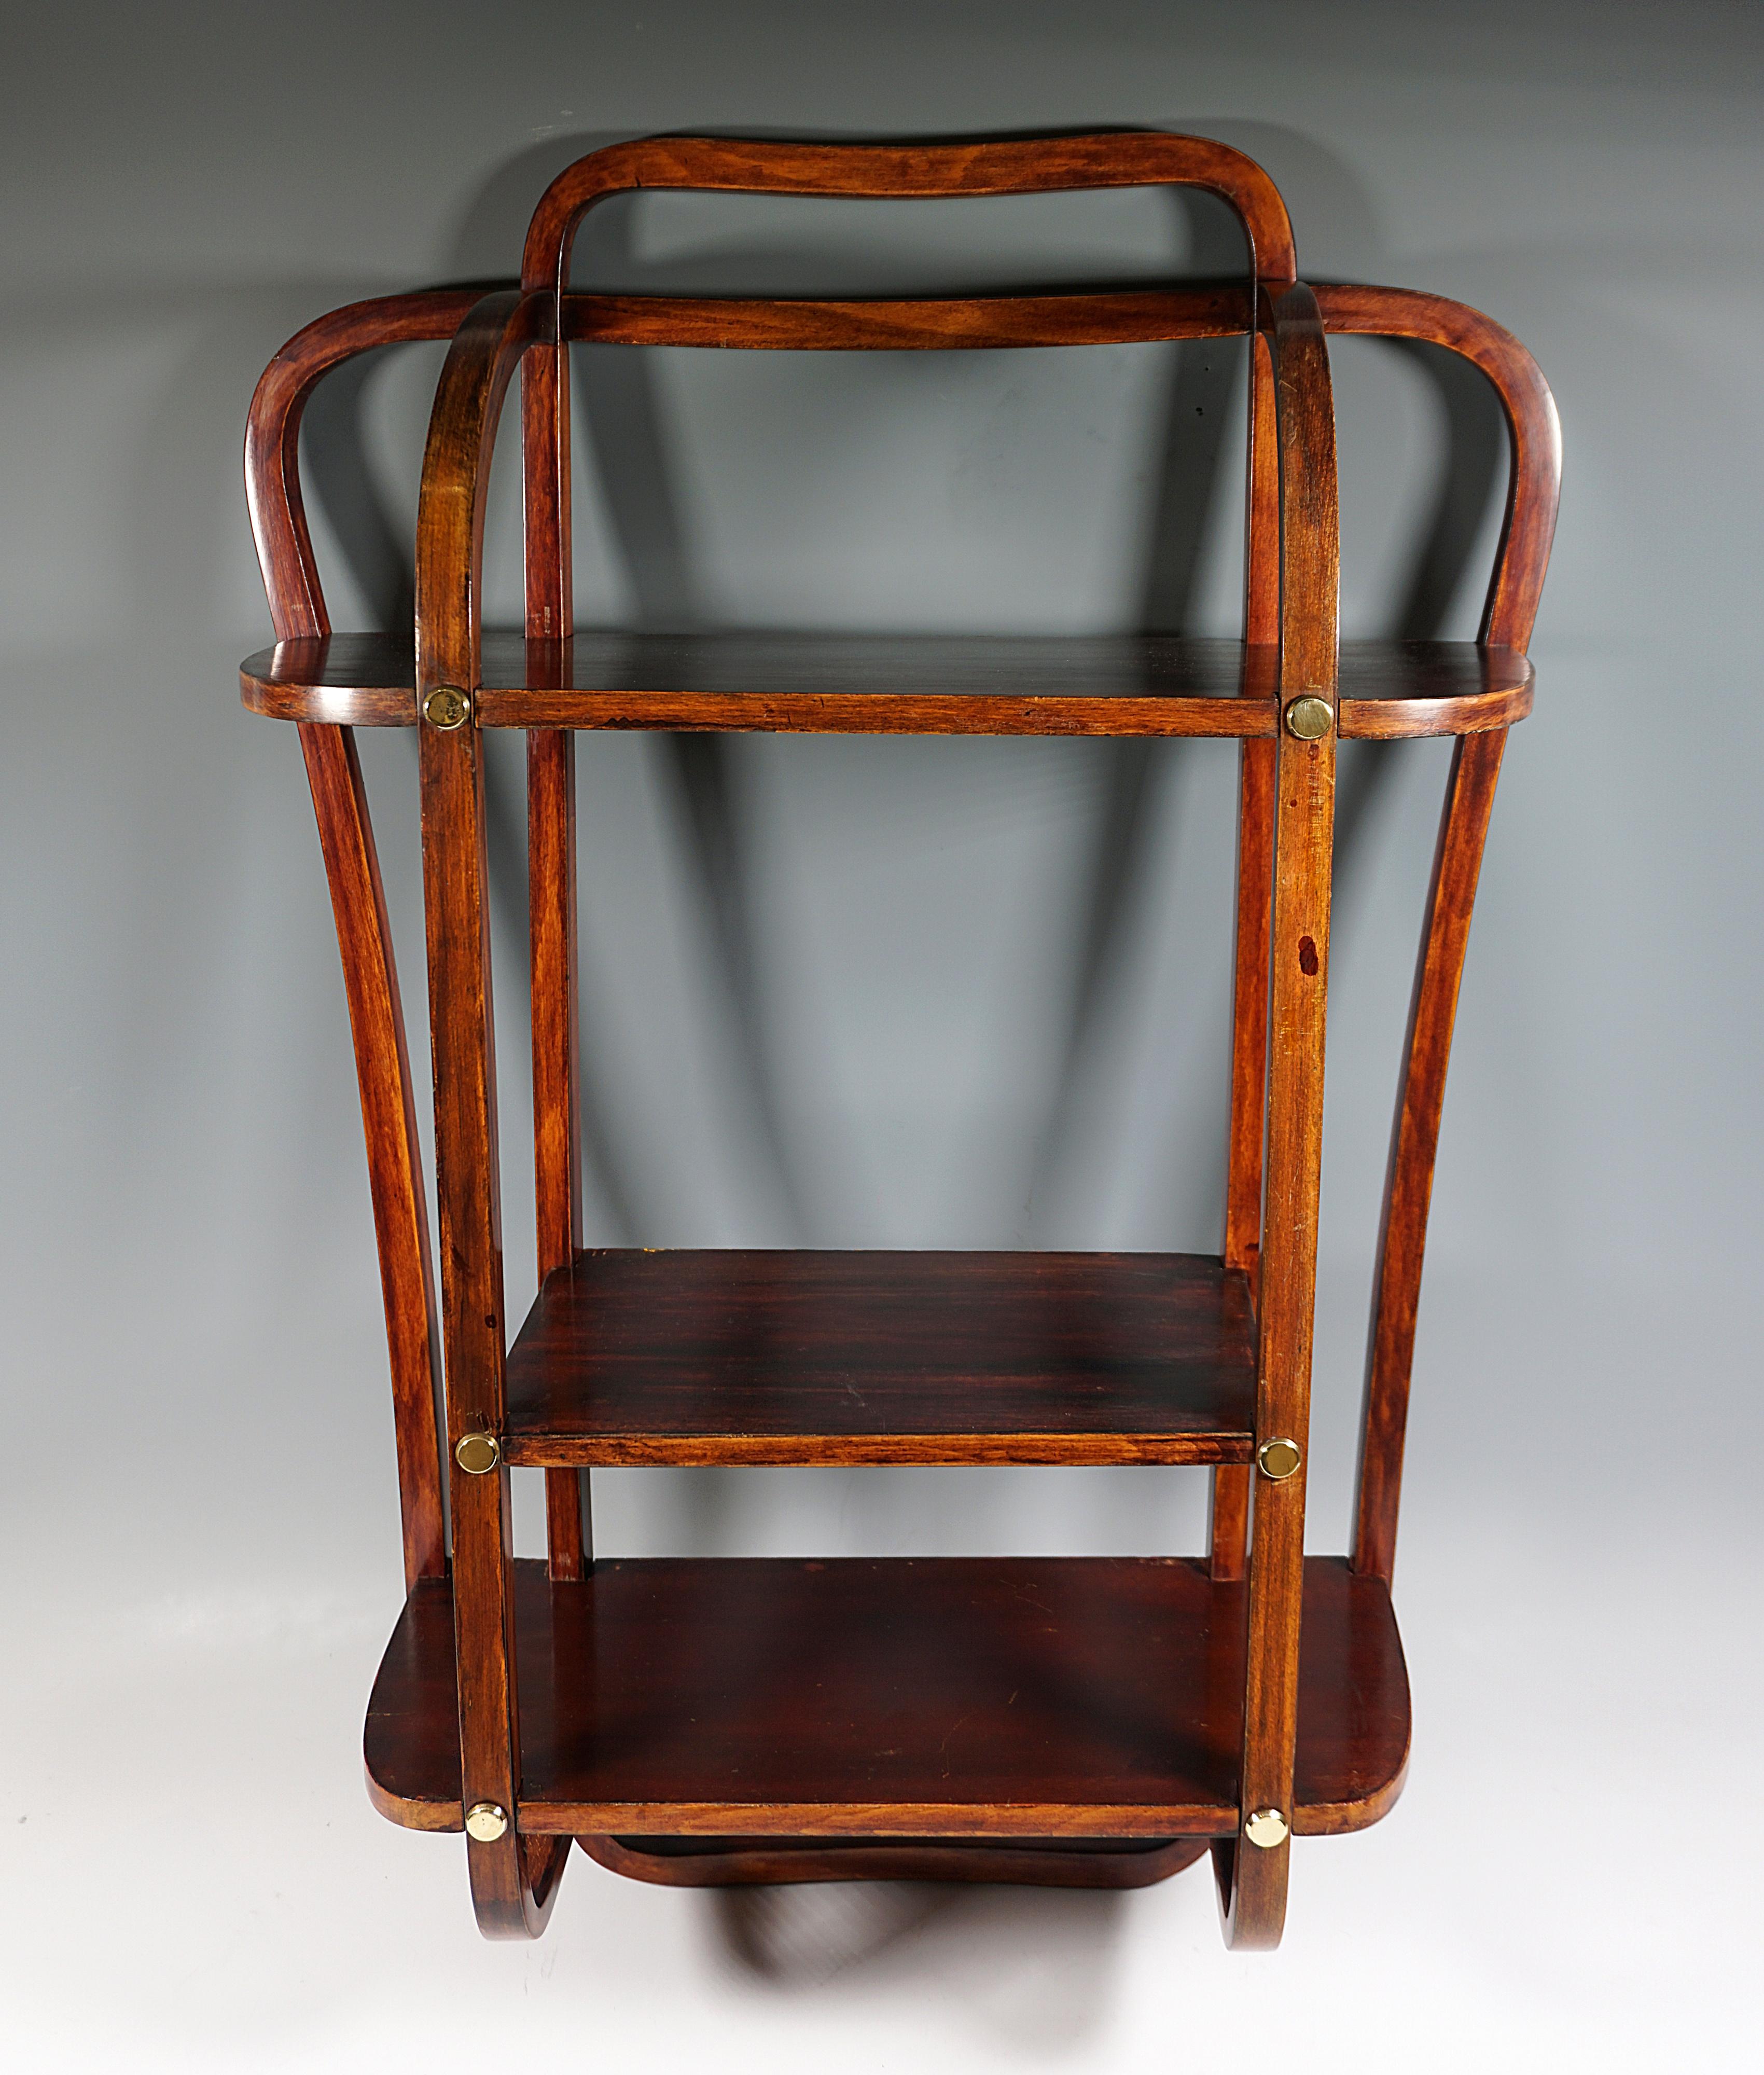 Early 20th Century Thonet Vienna Art Nouveau Wall Étagère No 51, Book Shelf, Mahogany stained, 1903